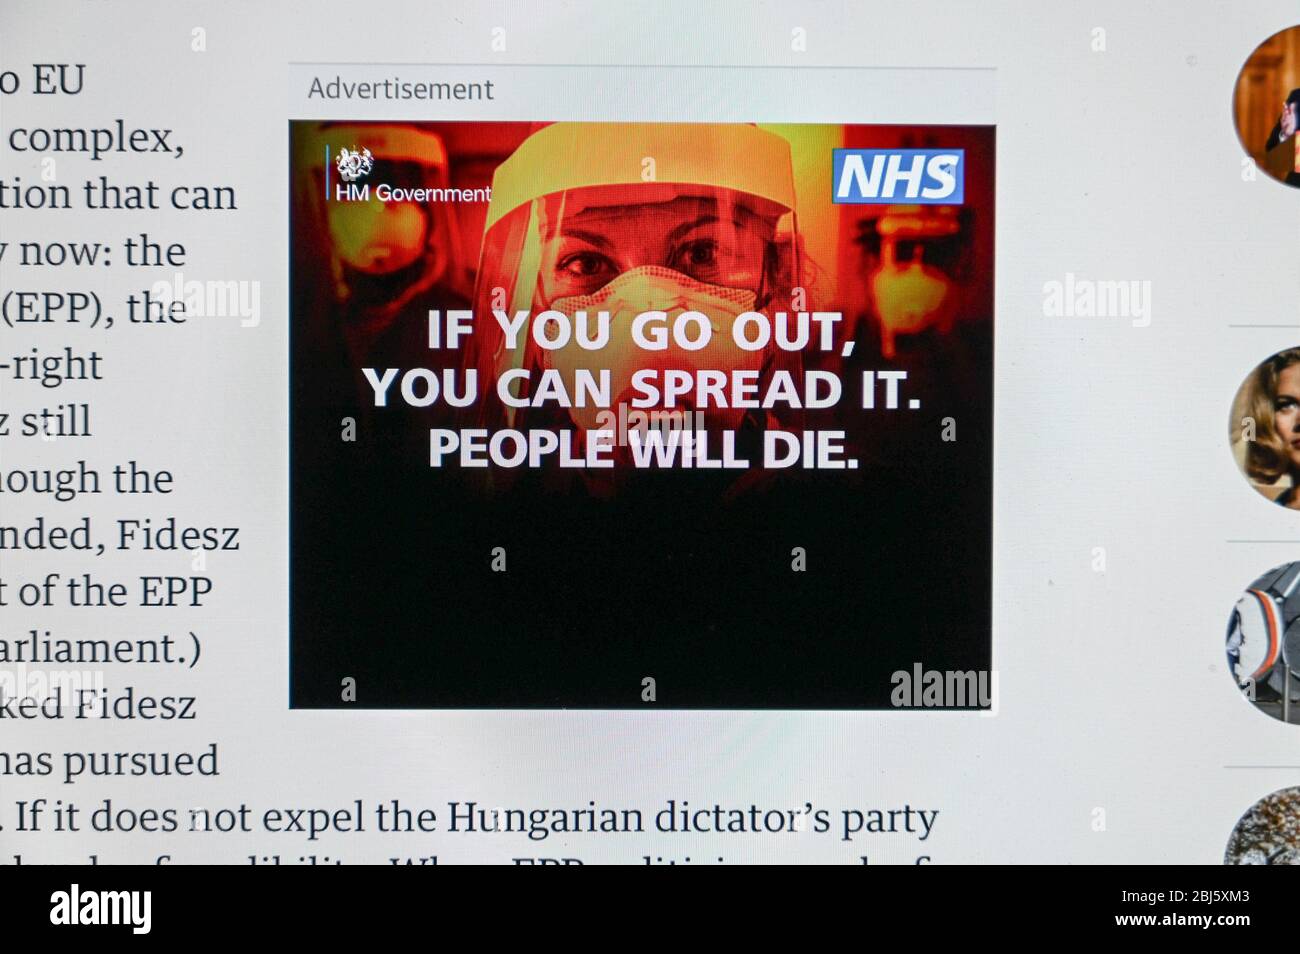 Covid/ Coronavirus. UK government public health advert 'If you go out you can spread it. People will die.', over a picture of a health worker. Stock Photo